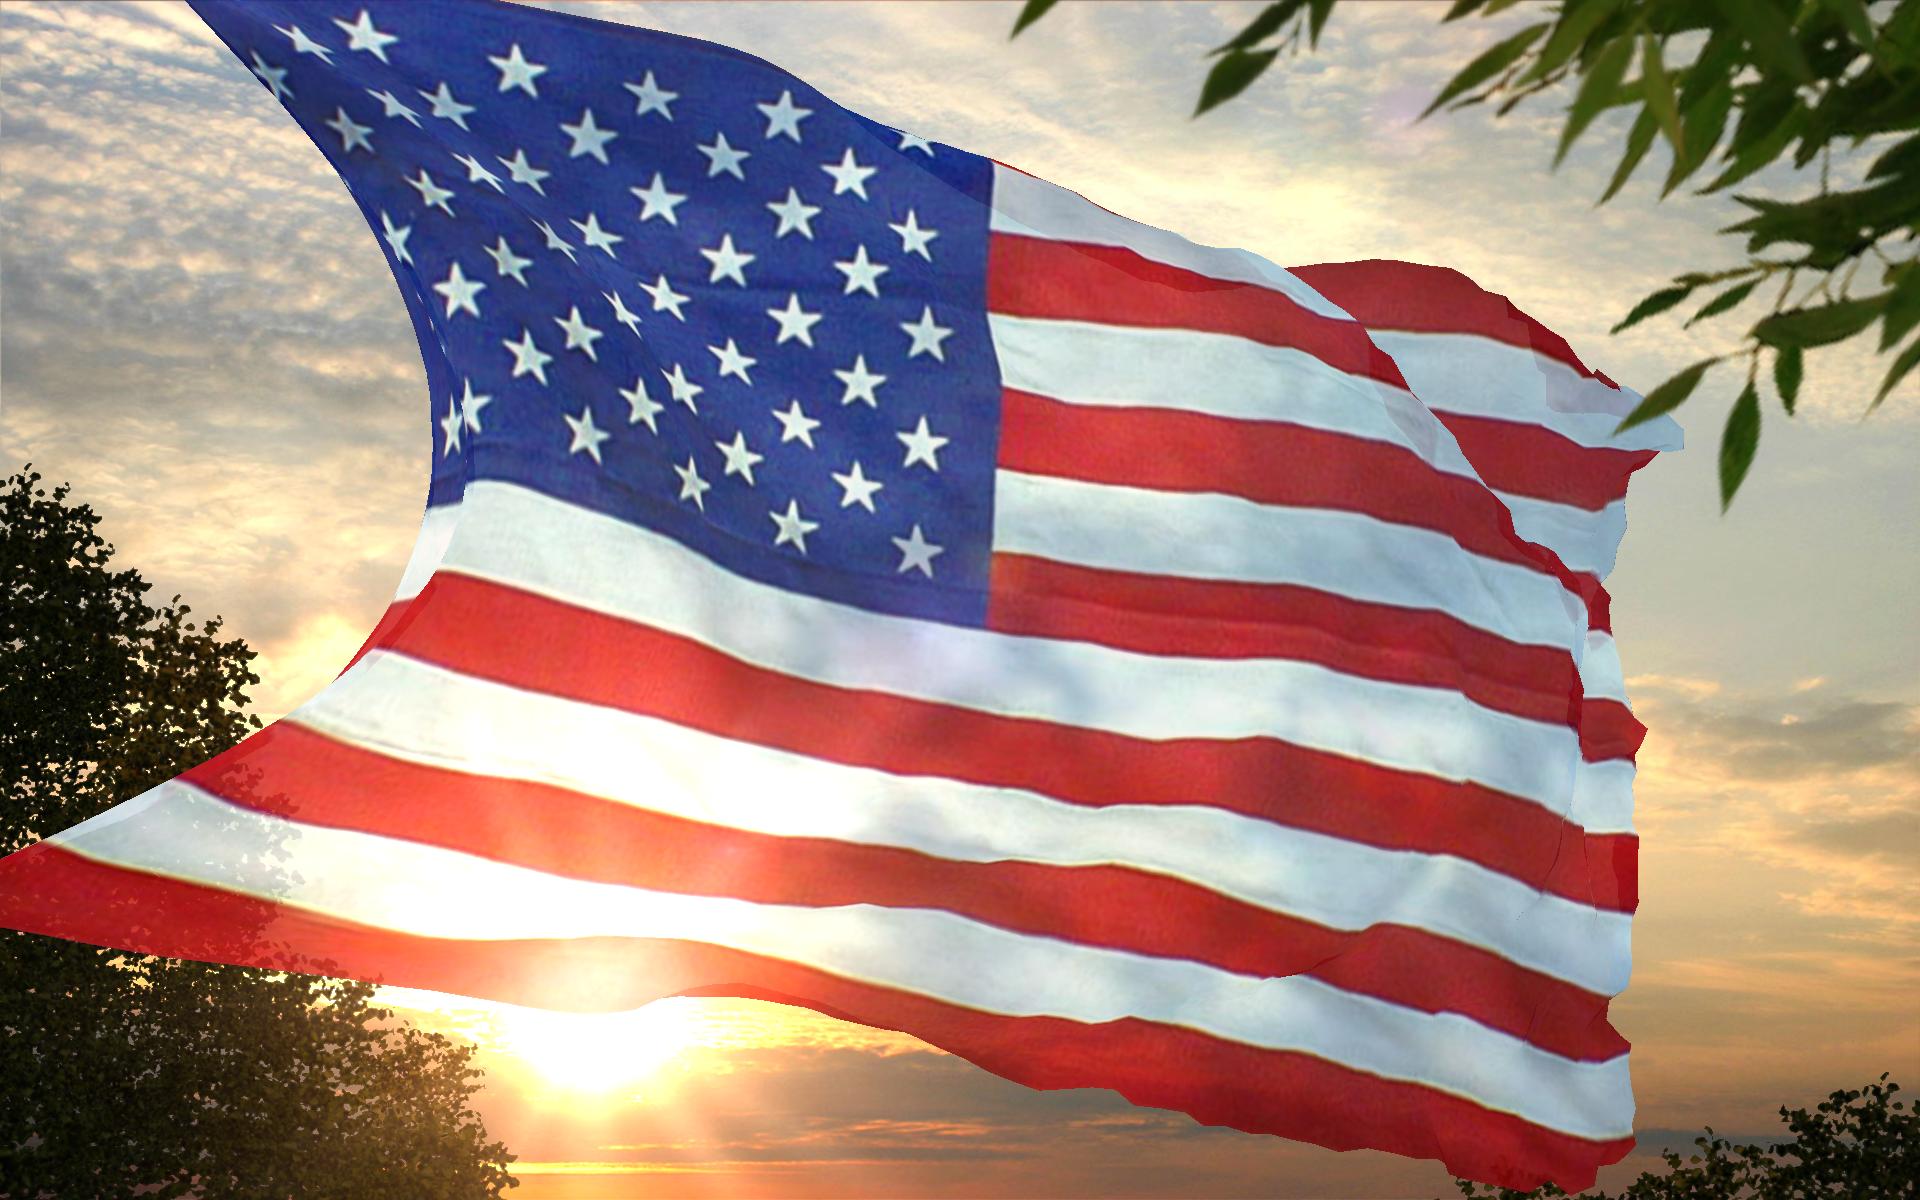 Cool American Flag Wallpapers